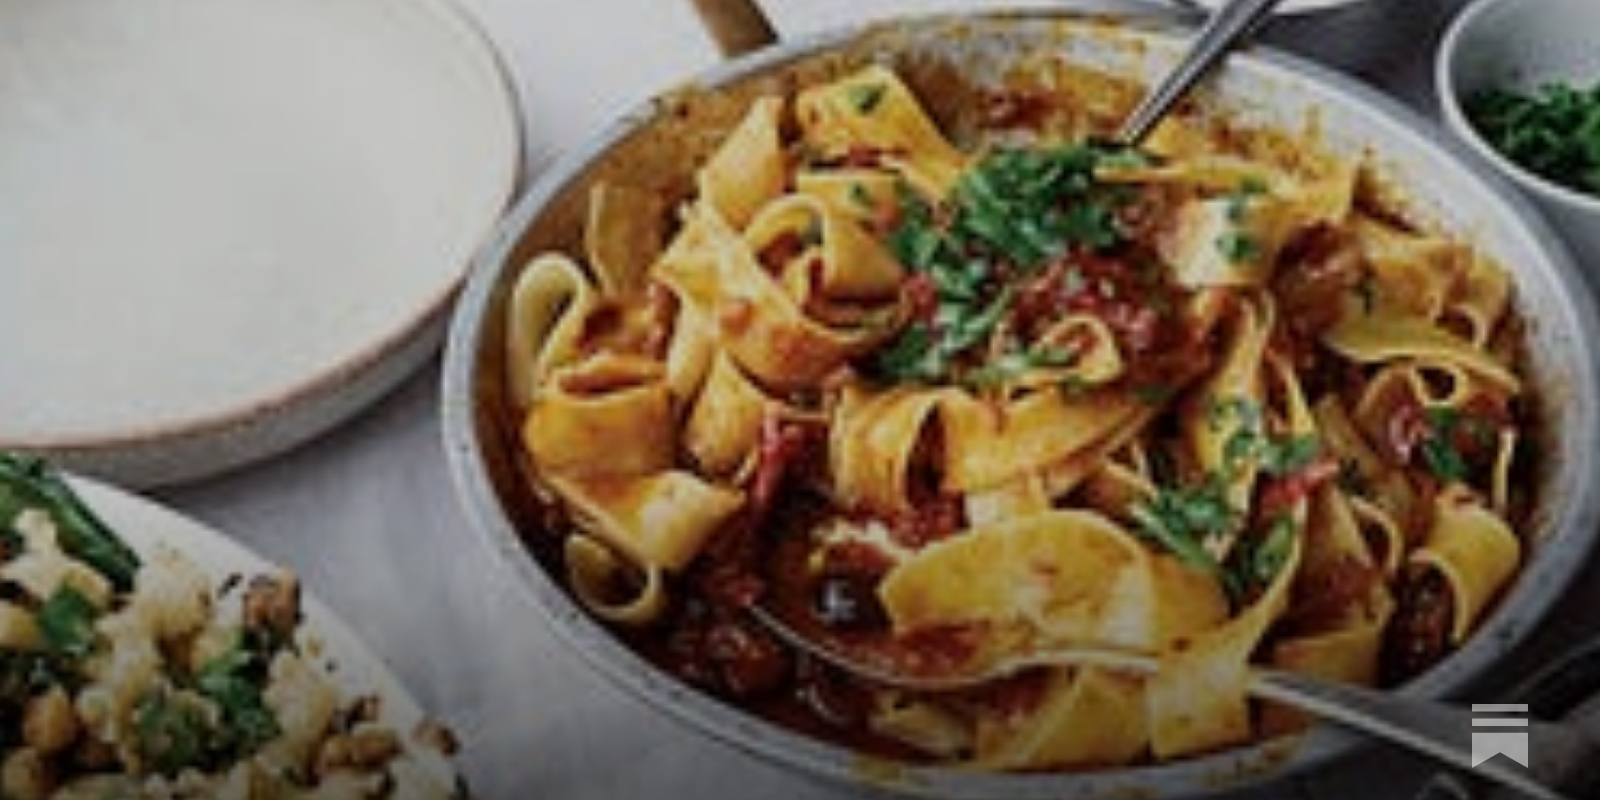 Papardelle with rose harissa black olive & capers recipe